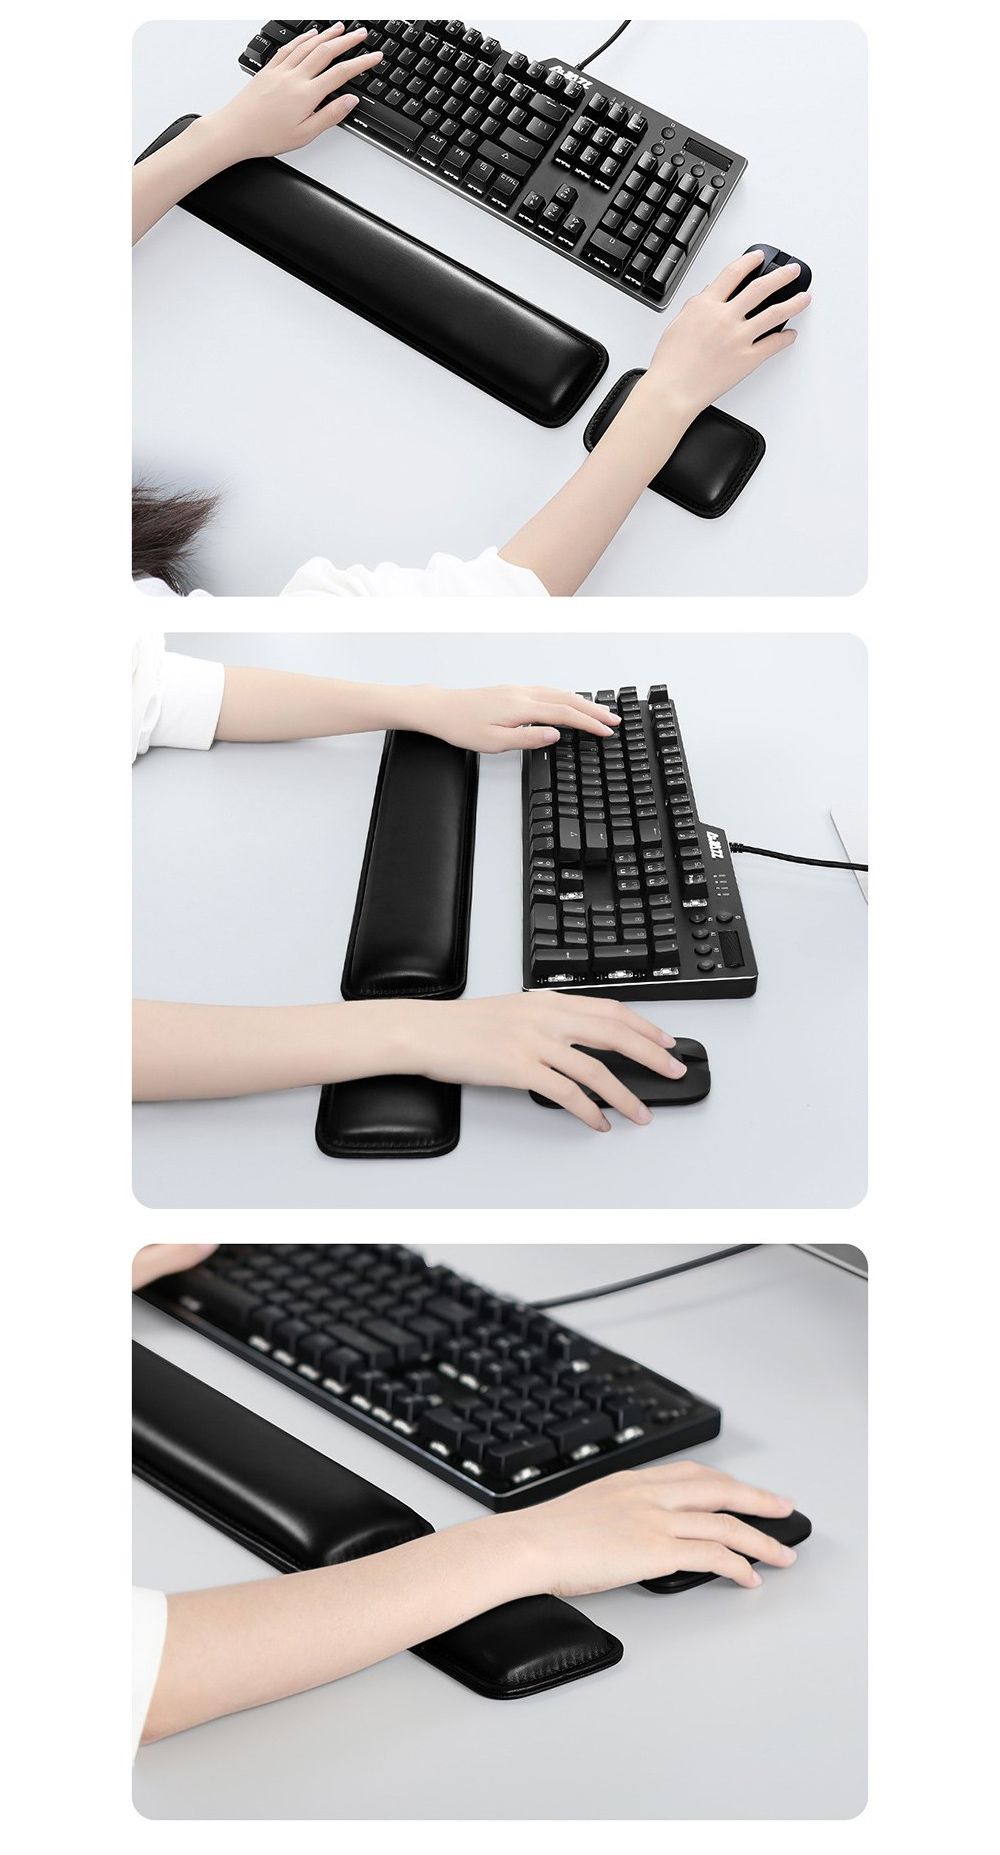 BUBM-Leather-Wrist-Support-Keyboard-and-Mouse-Wrist-Rest-Pad-Hand-Palm-Rest-Support-for-Typing-Gamin-1731274